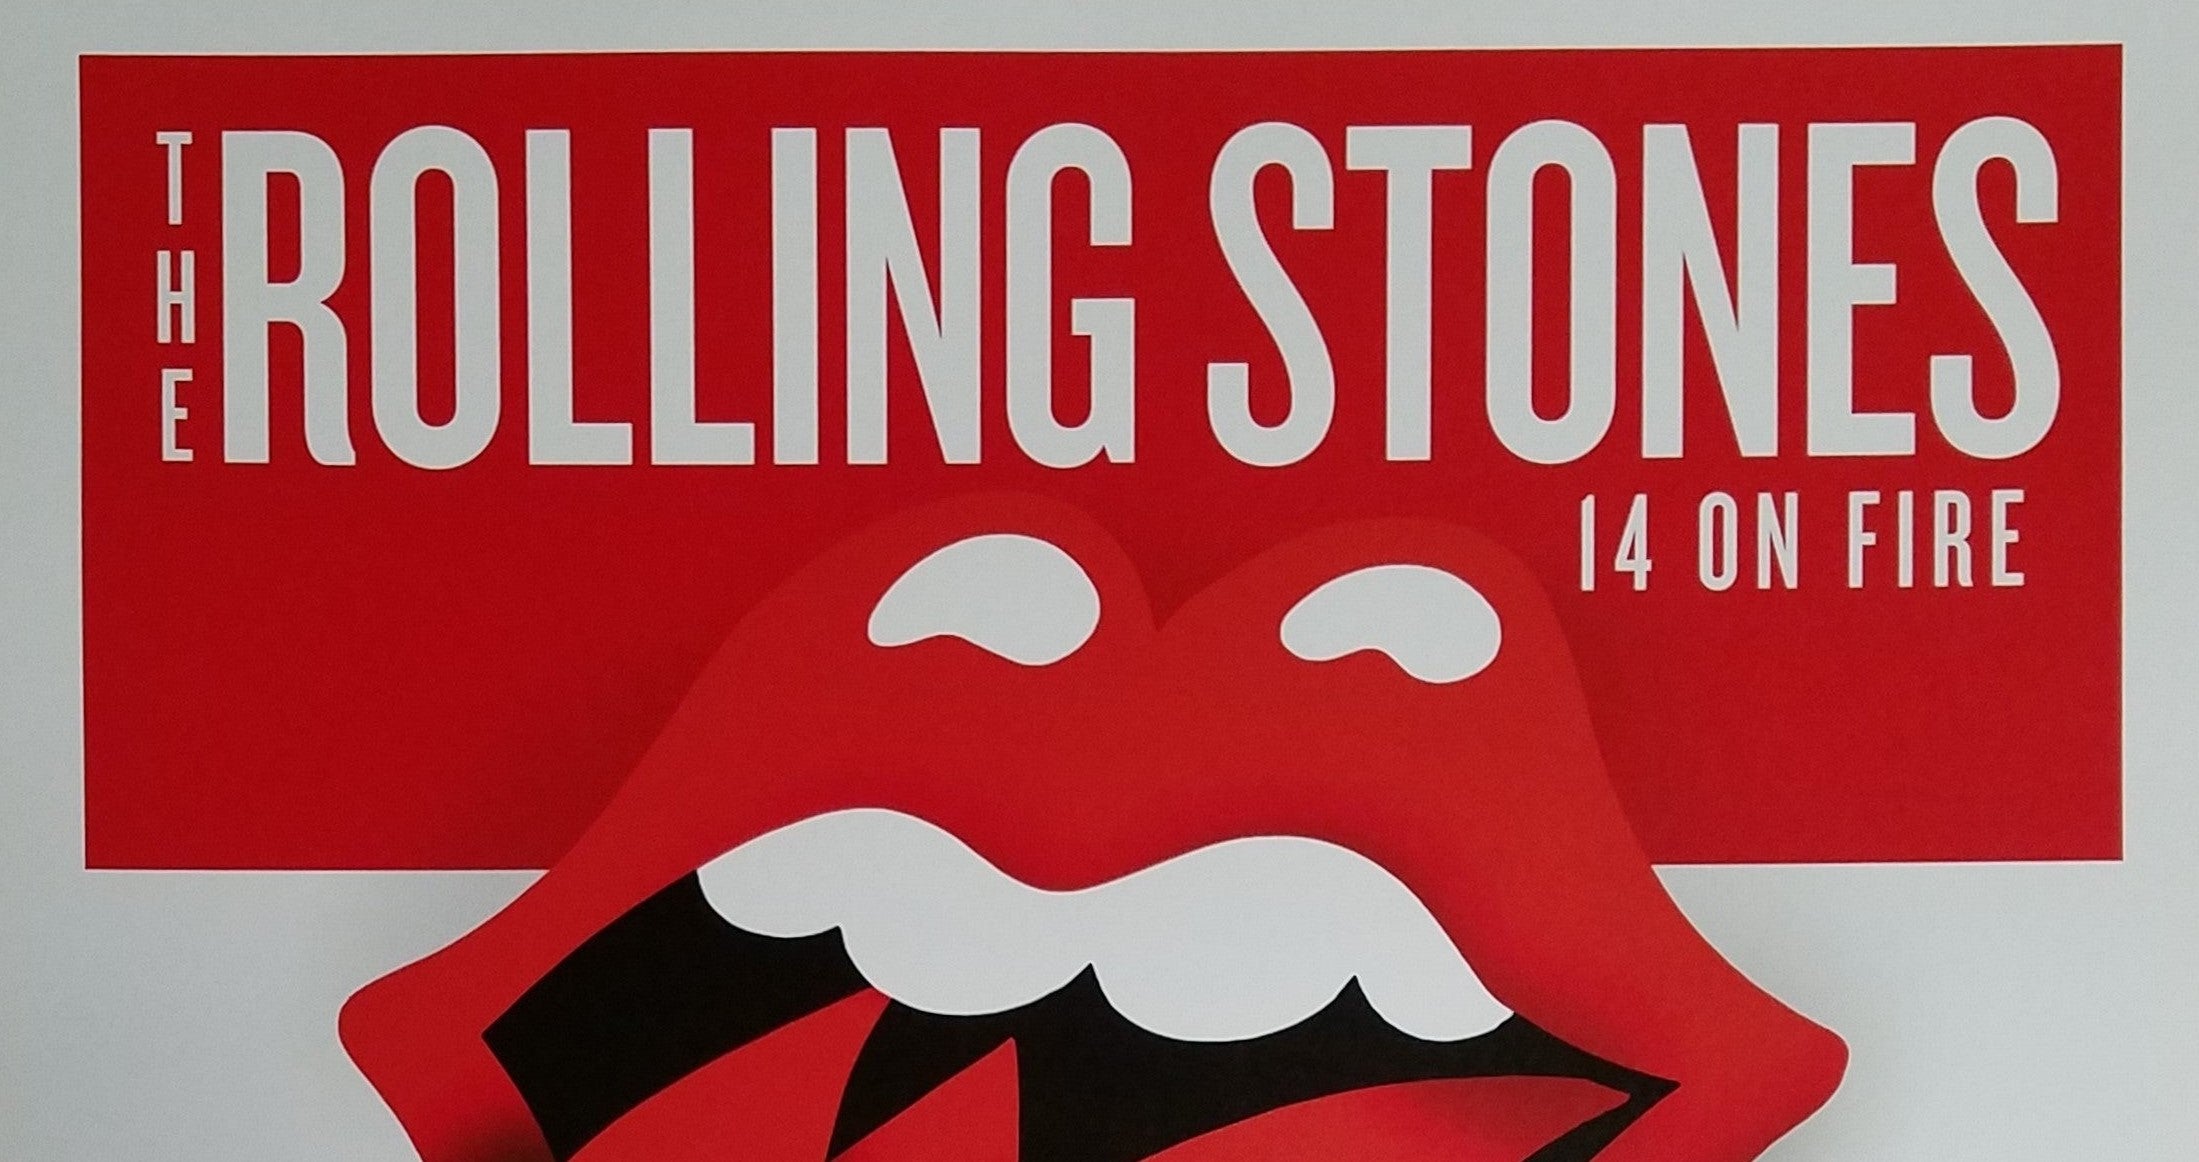 Title: Rolling Stones - 2014 OFFICIAL POSTER LANDGRAAF, NETHERLANDS #1  Poster artist:   Edition:  Lithograph  Type: Limited edition lithograph   Size: 17" x 23"  Location:  Landgraaf, Netherlands   Venue: Pinkpop Festival   Notes:   1st edition, official poster hand numbered and embossed.  Official poster, Europe 14 On Fire Tour original from the show!